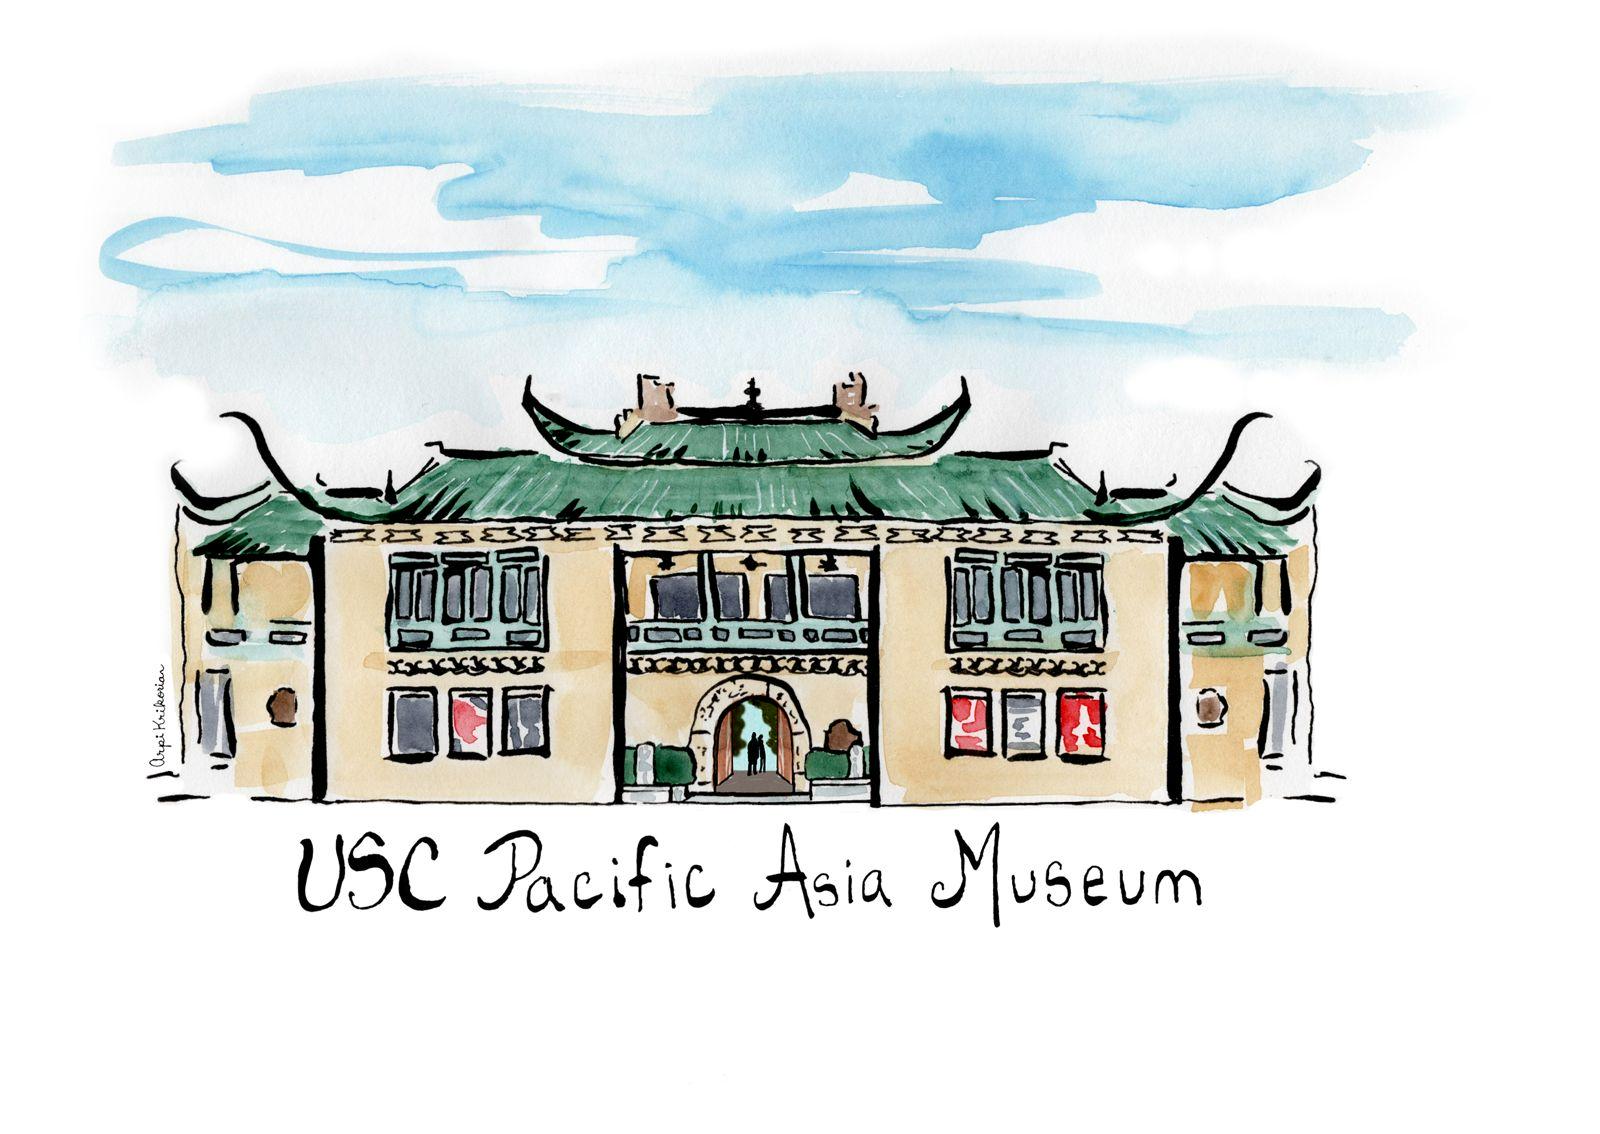 Coming Full Circle - My Journey Back to the Pacific Asia Museum